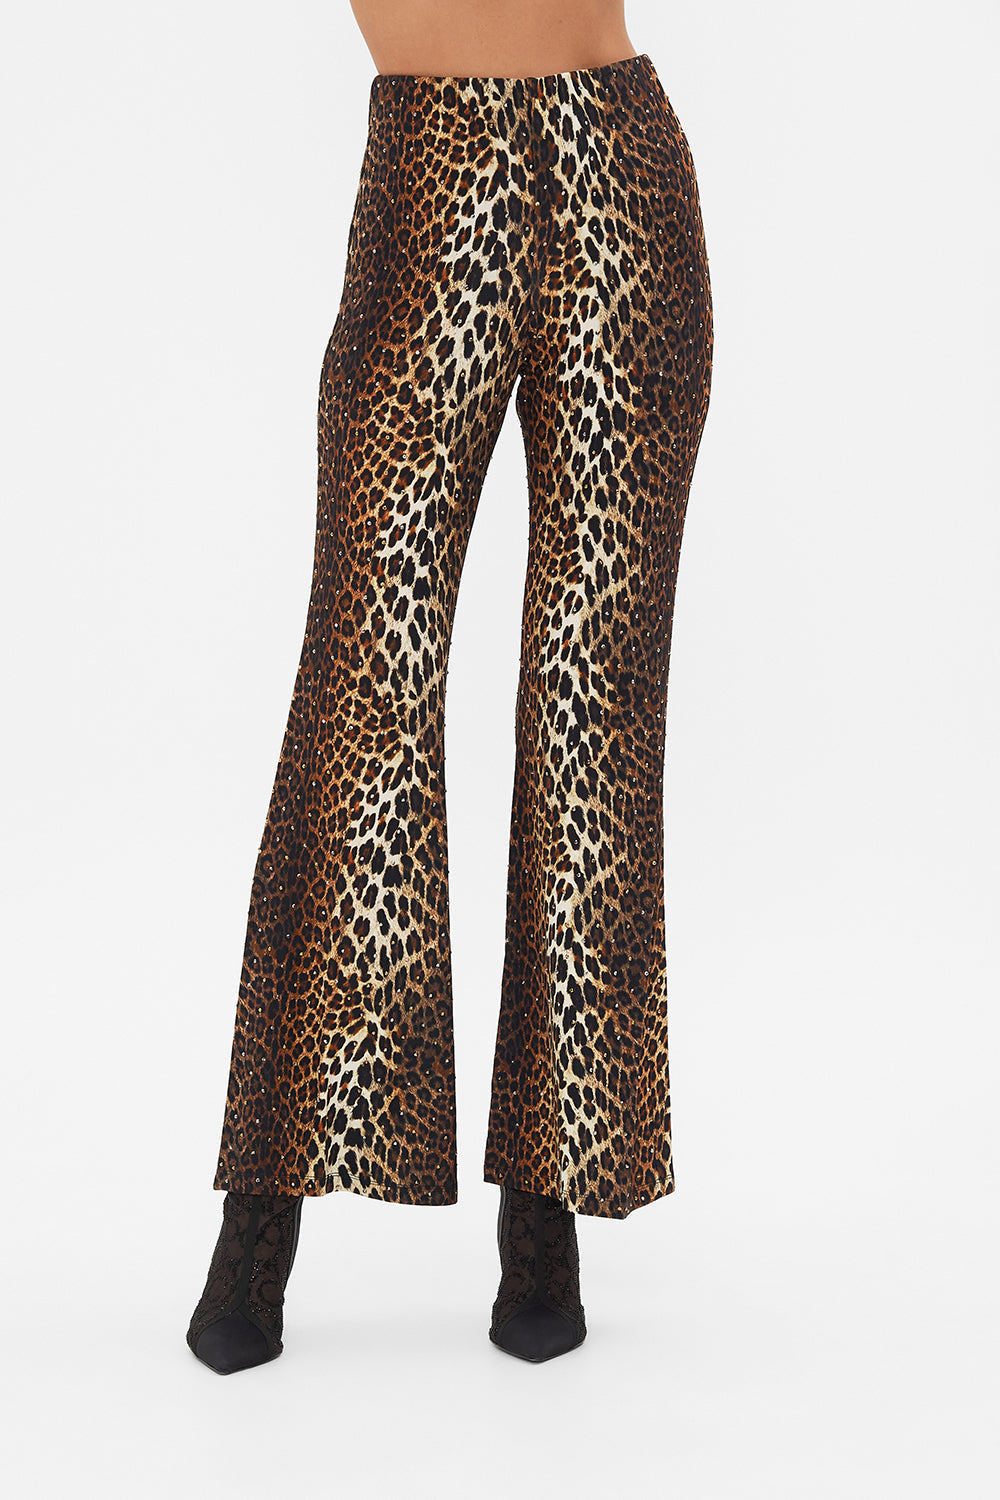 CAMILLA leopard jersey flare pant in Amsterglam print.